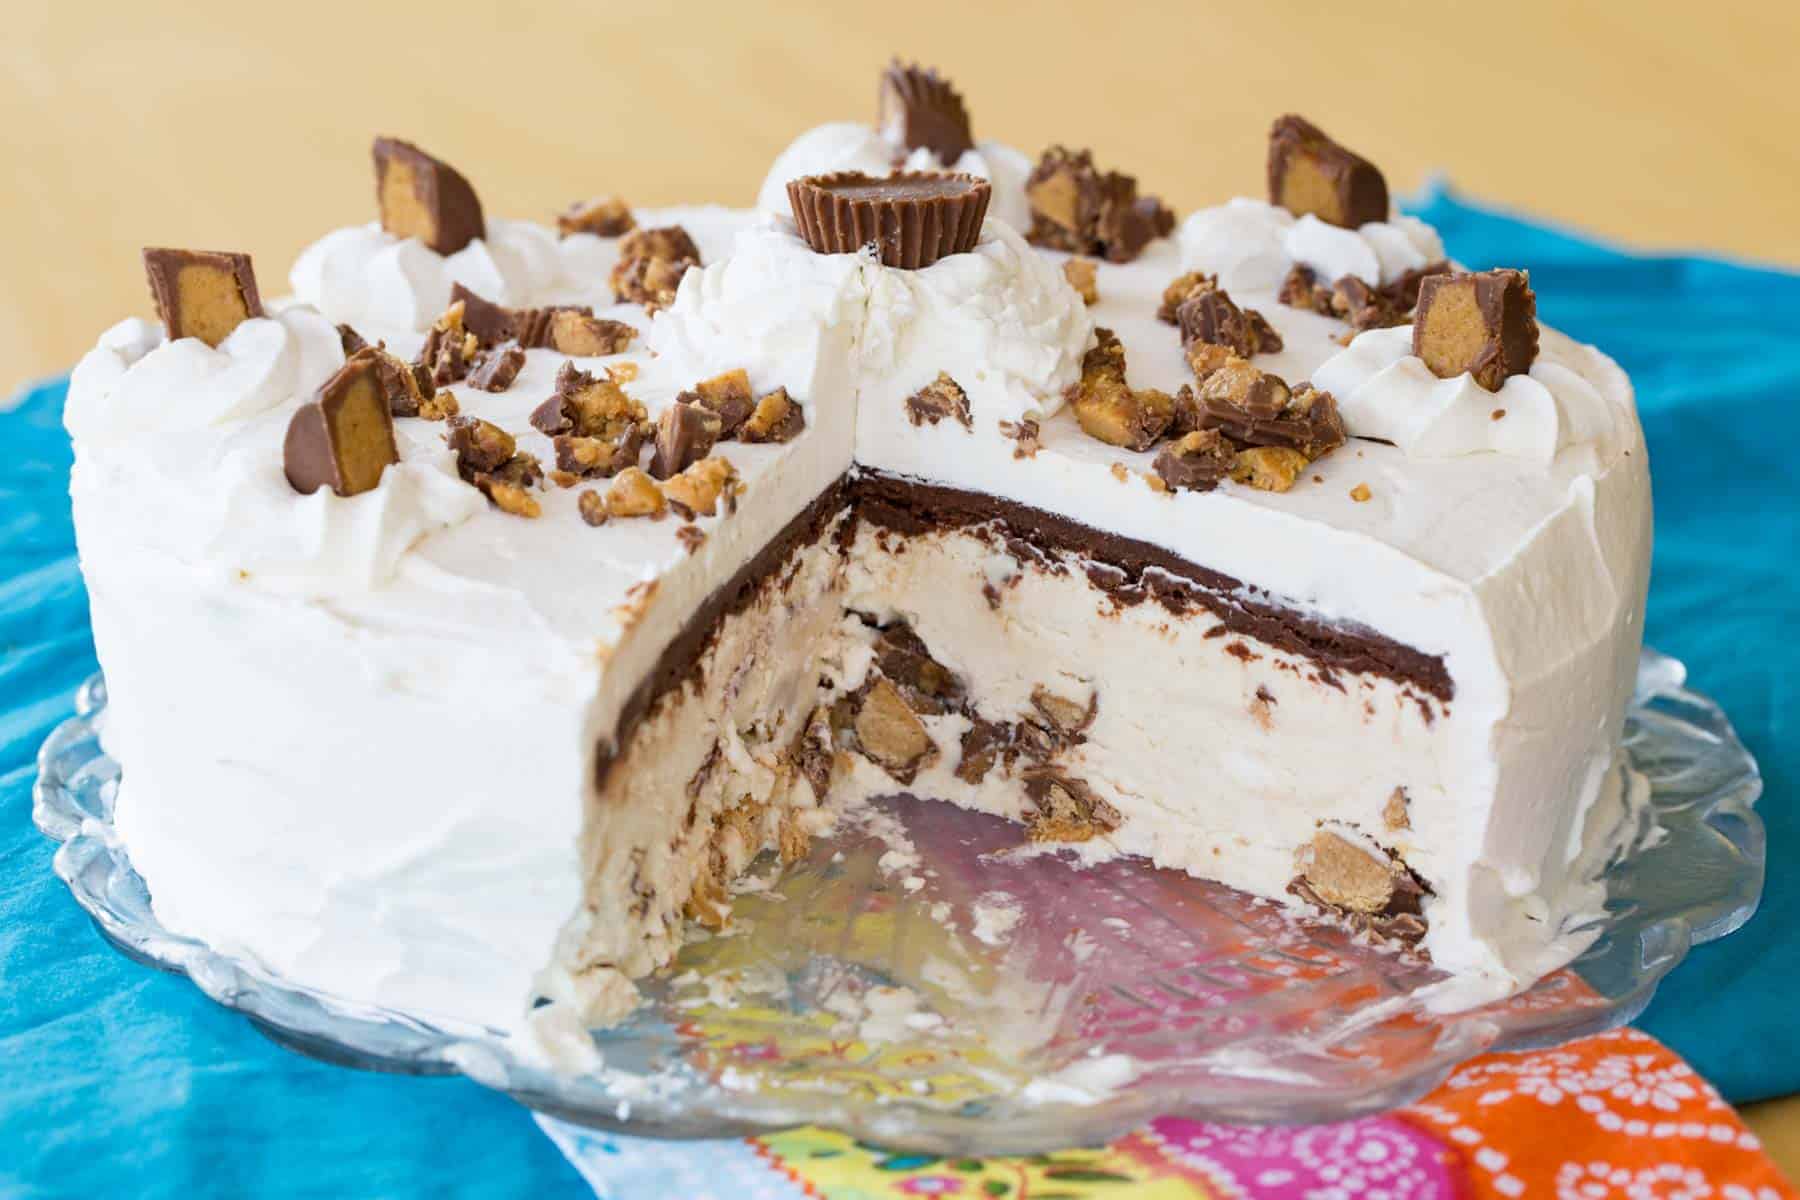 A Reese's ice cream cake on a platter with a slice removed to show the layers.